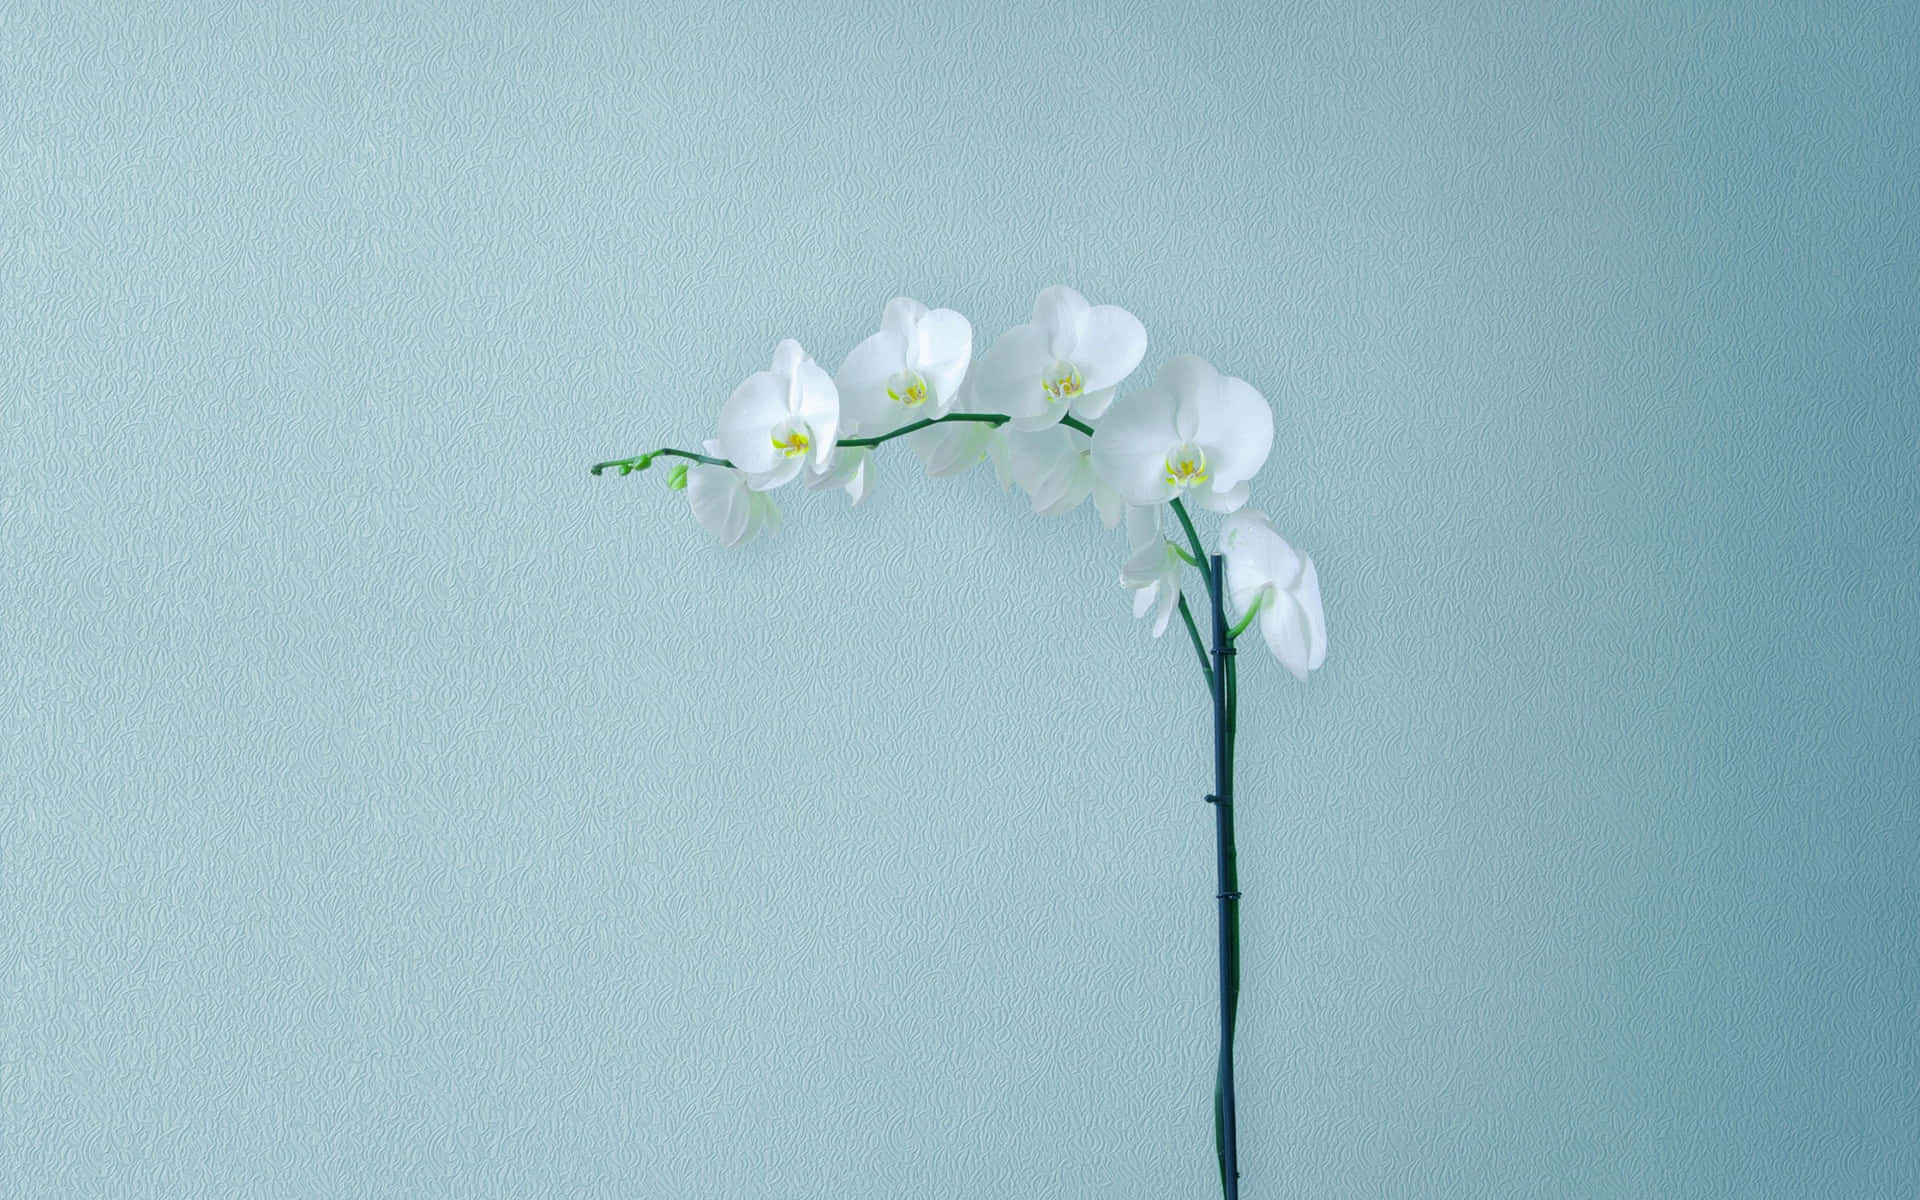 The beauty of minimalism - simple yet powerful Wallpaper